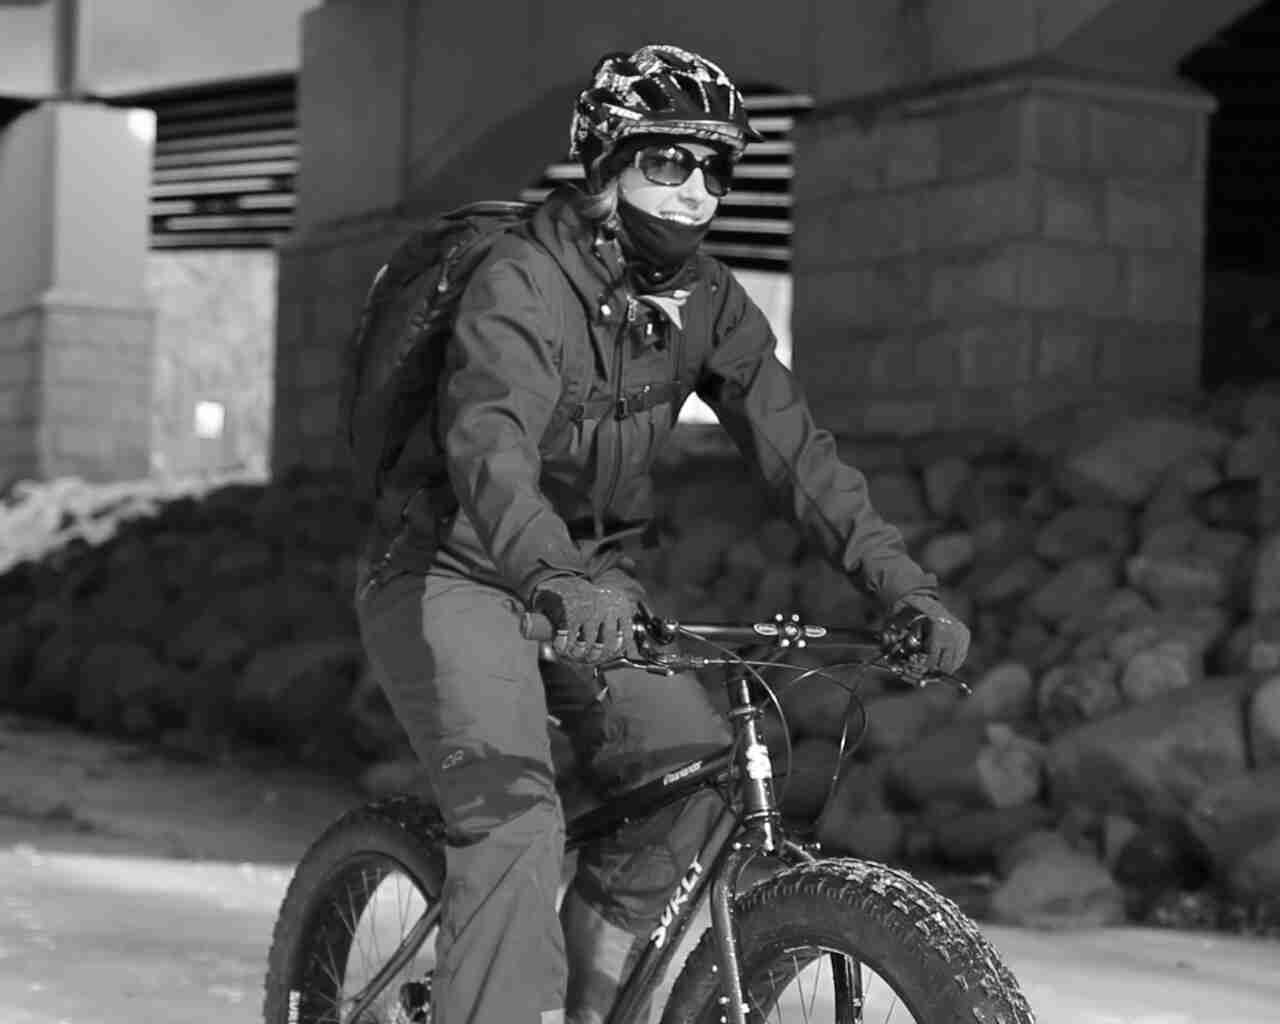 Front, right side view of a cyclist in winter attire, riding a Surly Moonlander fat bike on snow - black & white image